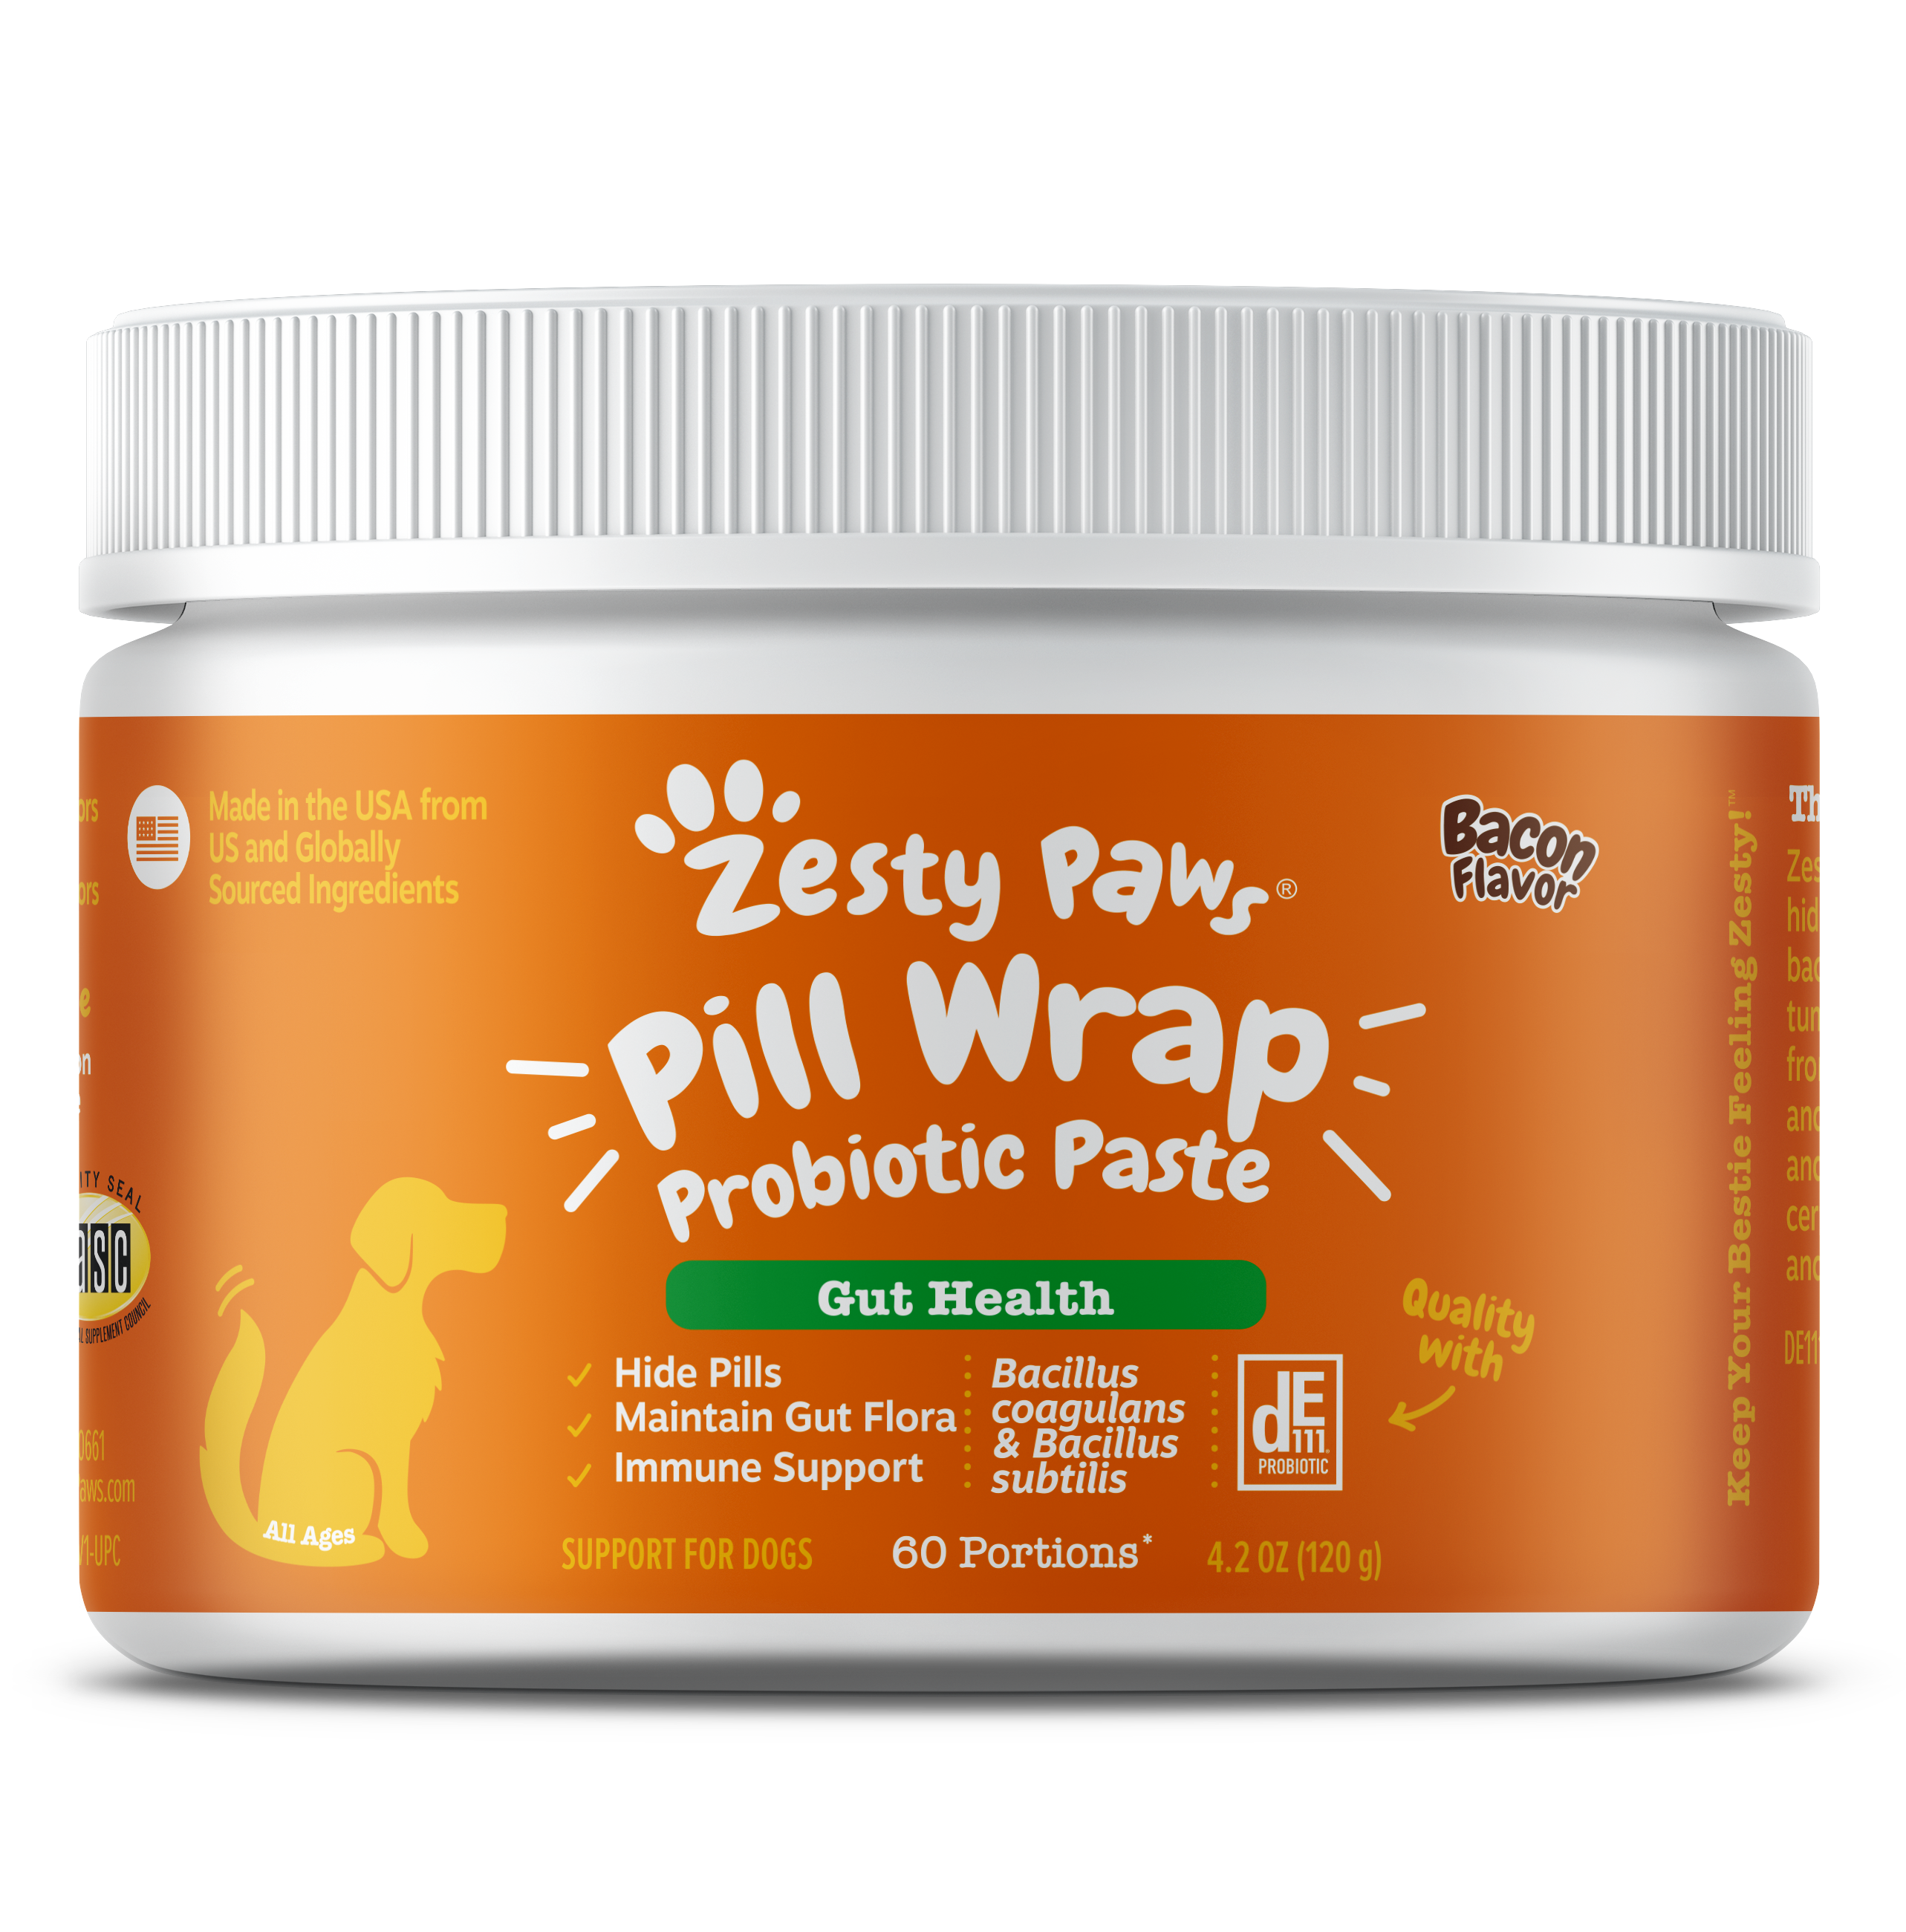 Pill Wrap Probiotic Paste for Dogs